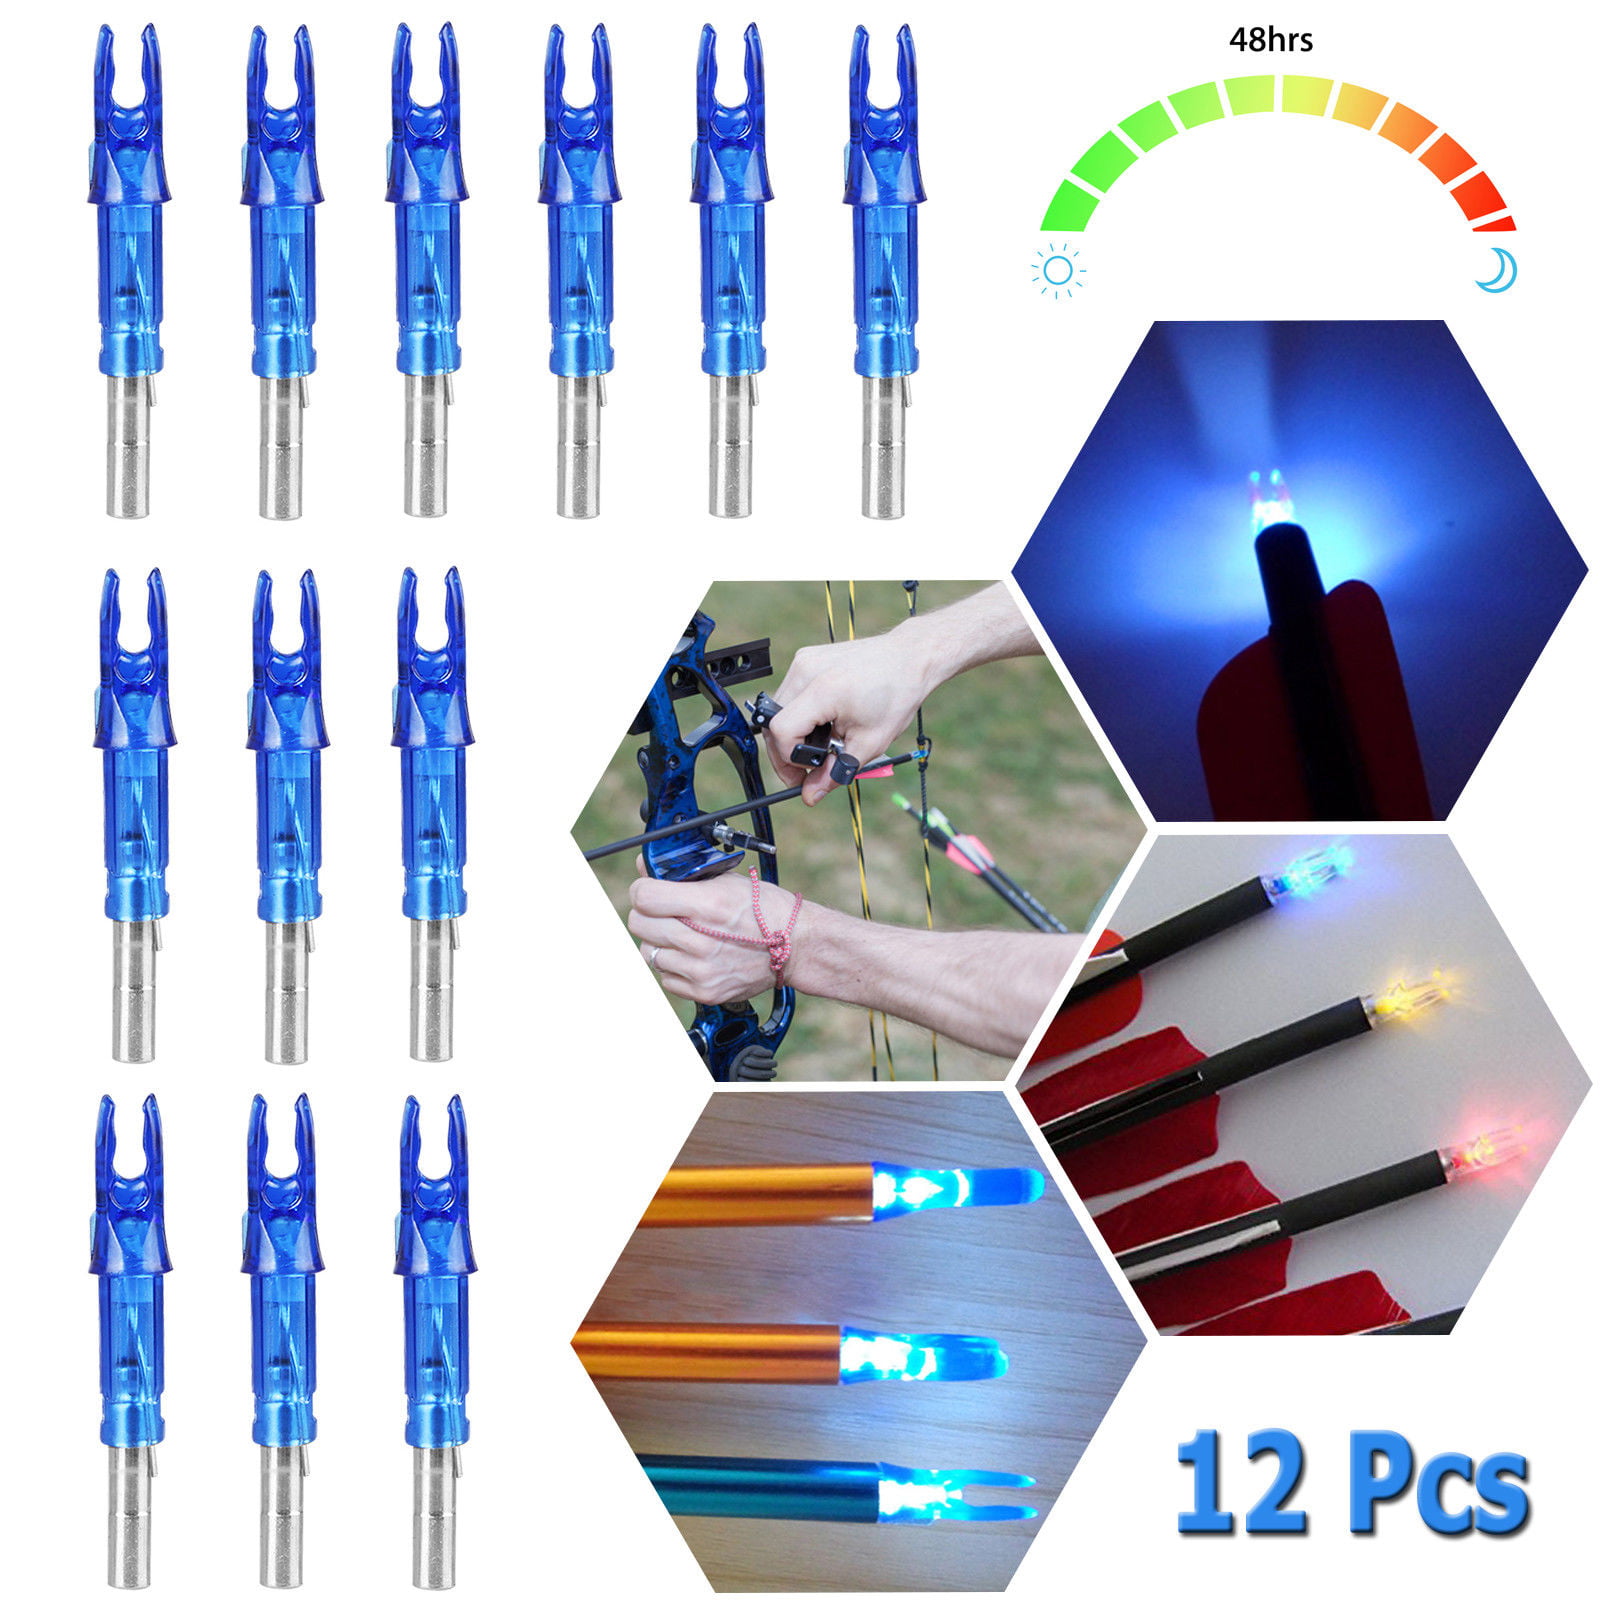 12PCS Automatically LED Lighted Arrow Nocks Tail for Crossbow Arrows Hunting